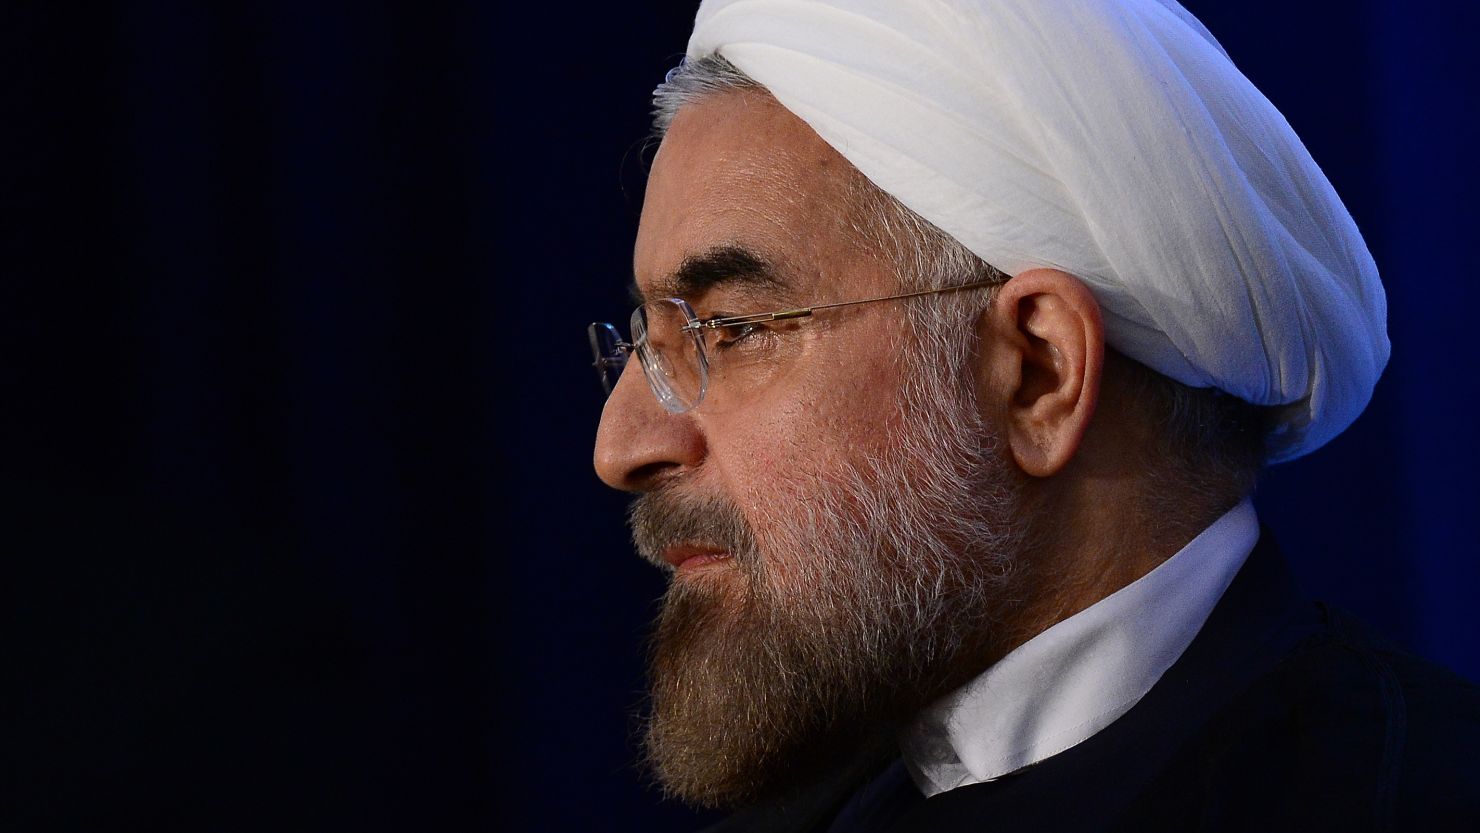 Hassan Rouhani's presidency is actually likely to perpetuate the dysfunction within the Iranian regime, says Alireza Nader. 